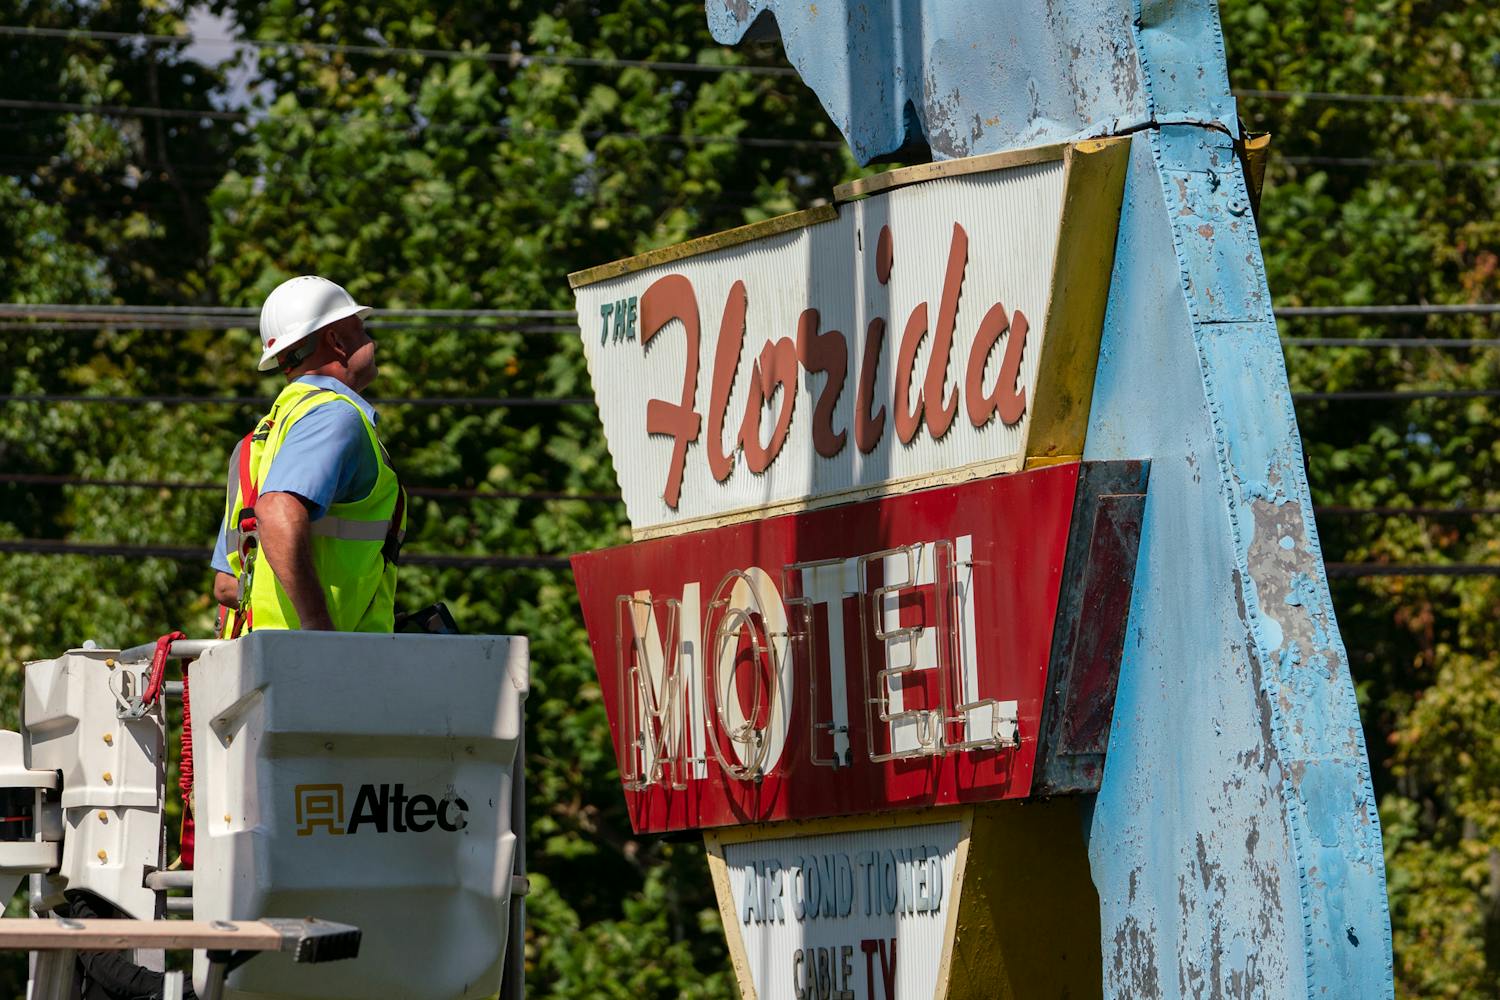 Construction workers dismantle the iconic Florida Motel sign on Southwest 13th Street Wednesday afternoon. It took six hours and a five-person crew.